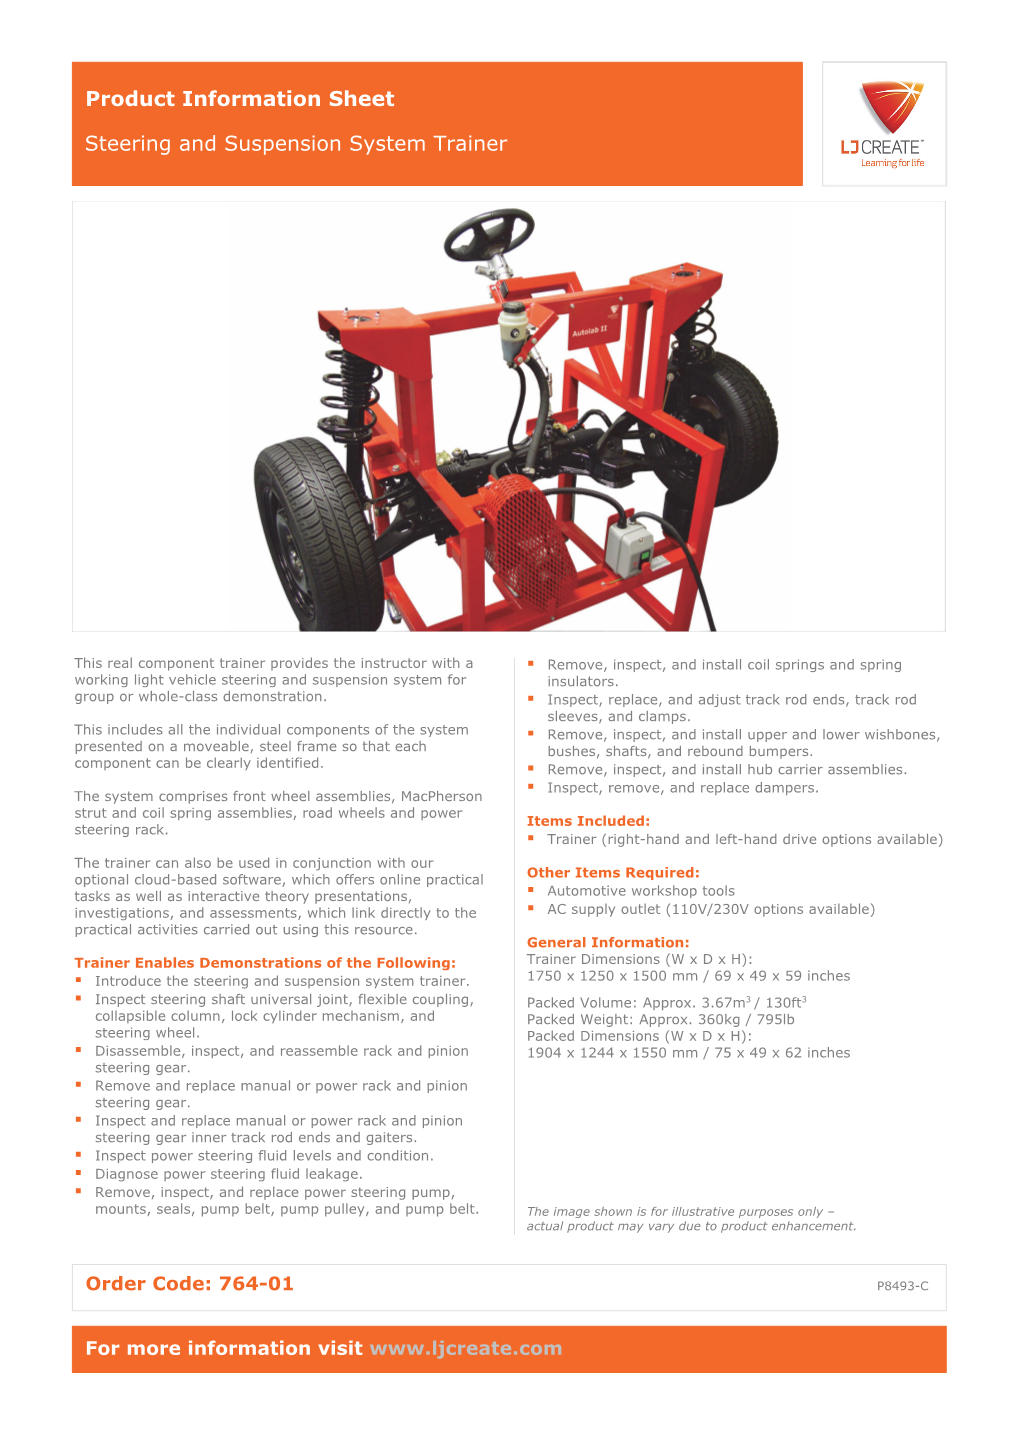 Product Information Sheet Steering and Suspension System Trainer